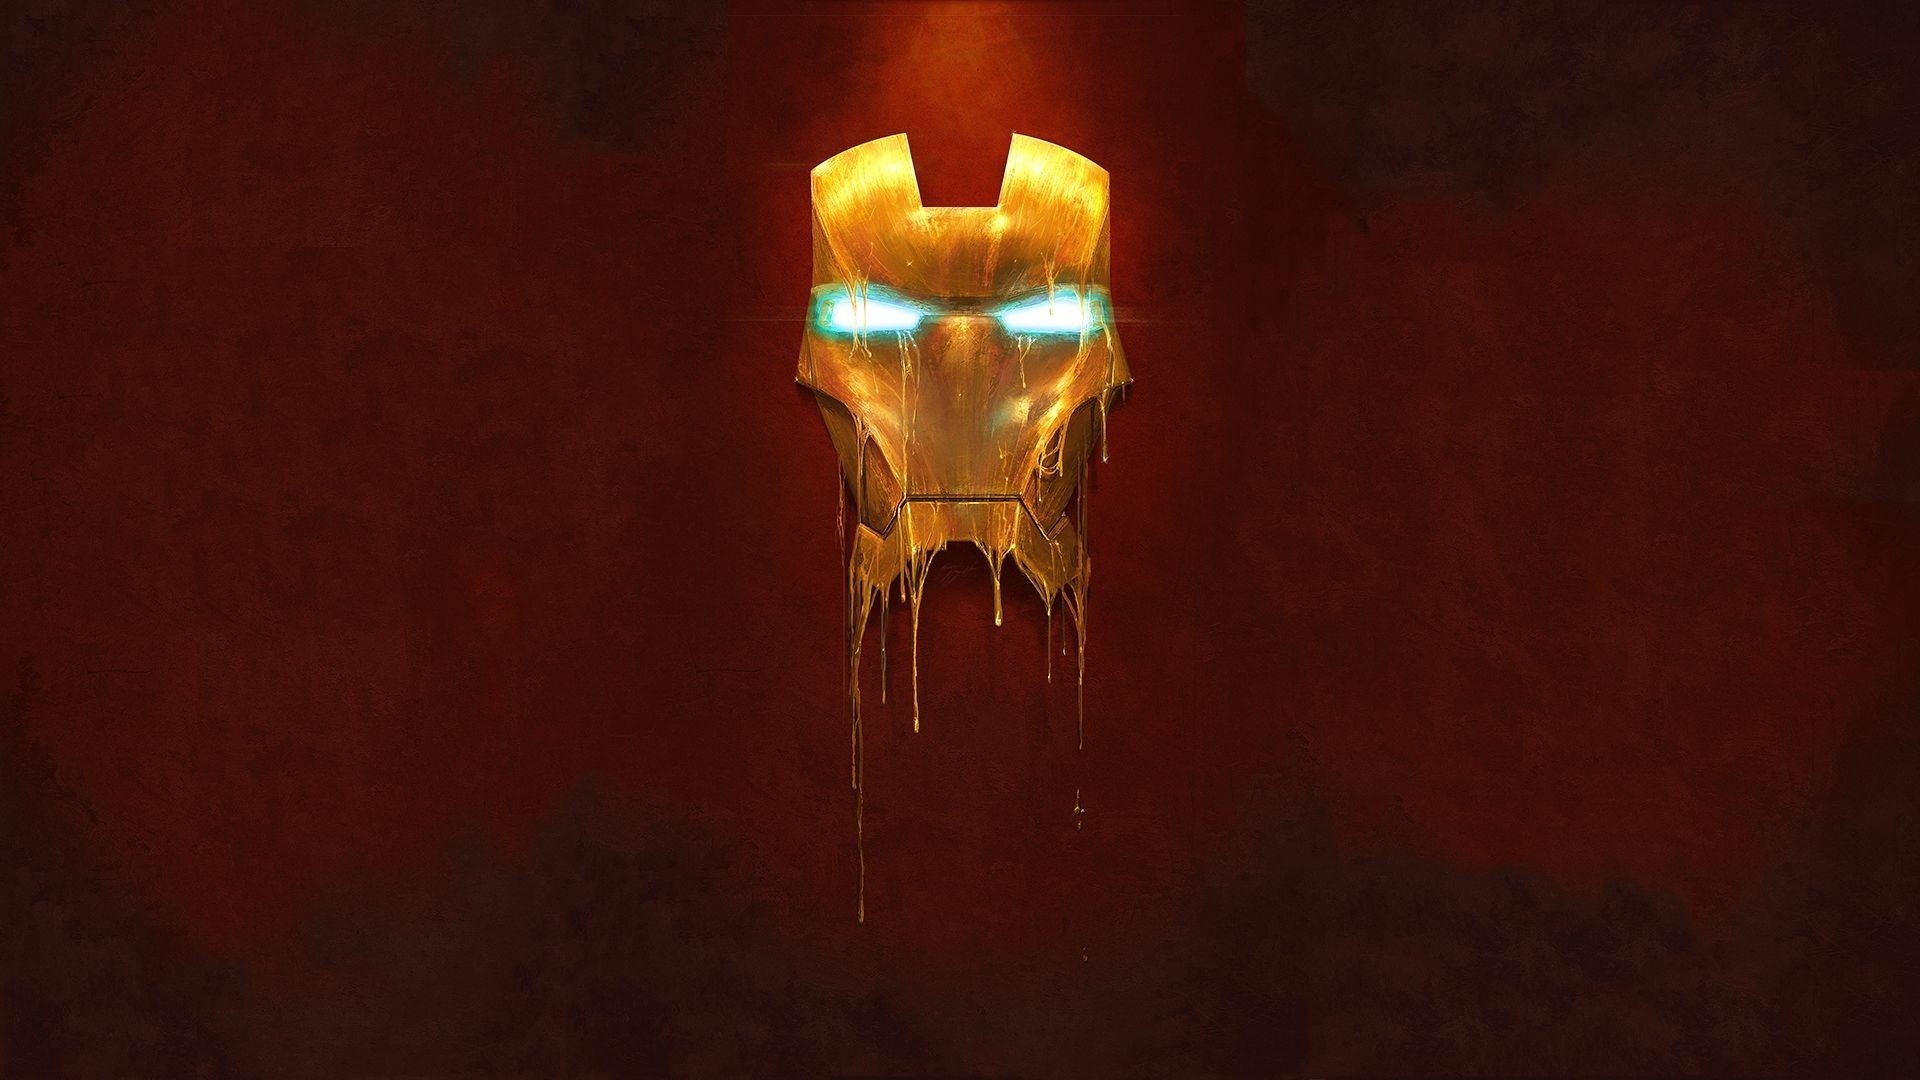 android iron man, cinema, background, red